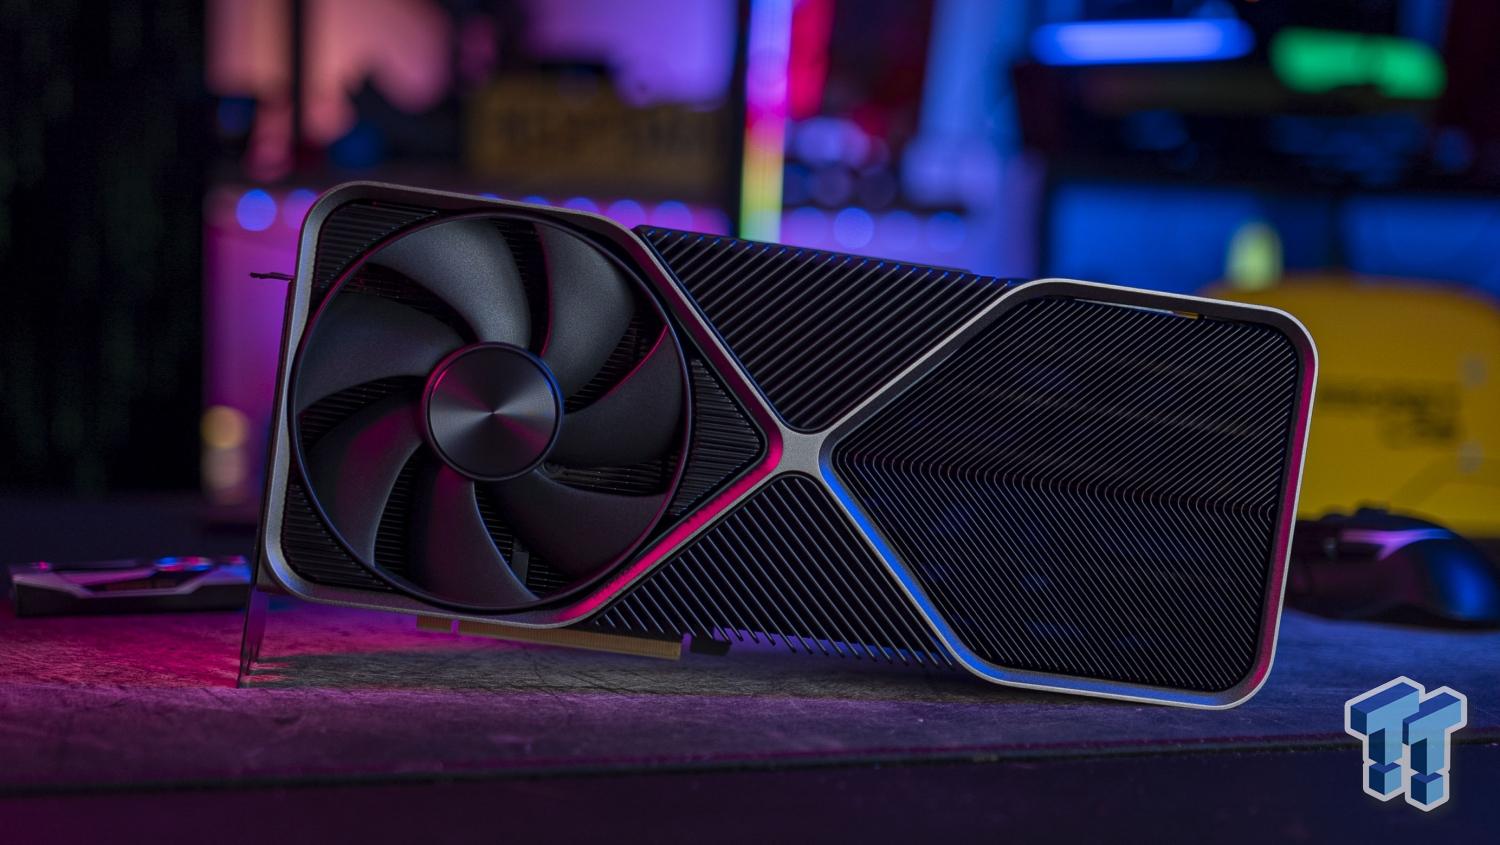 NVIDIA GeForce RTX 4080 review -- The Good 4080 is actually